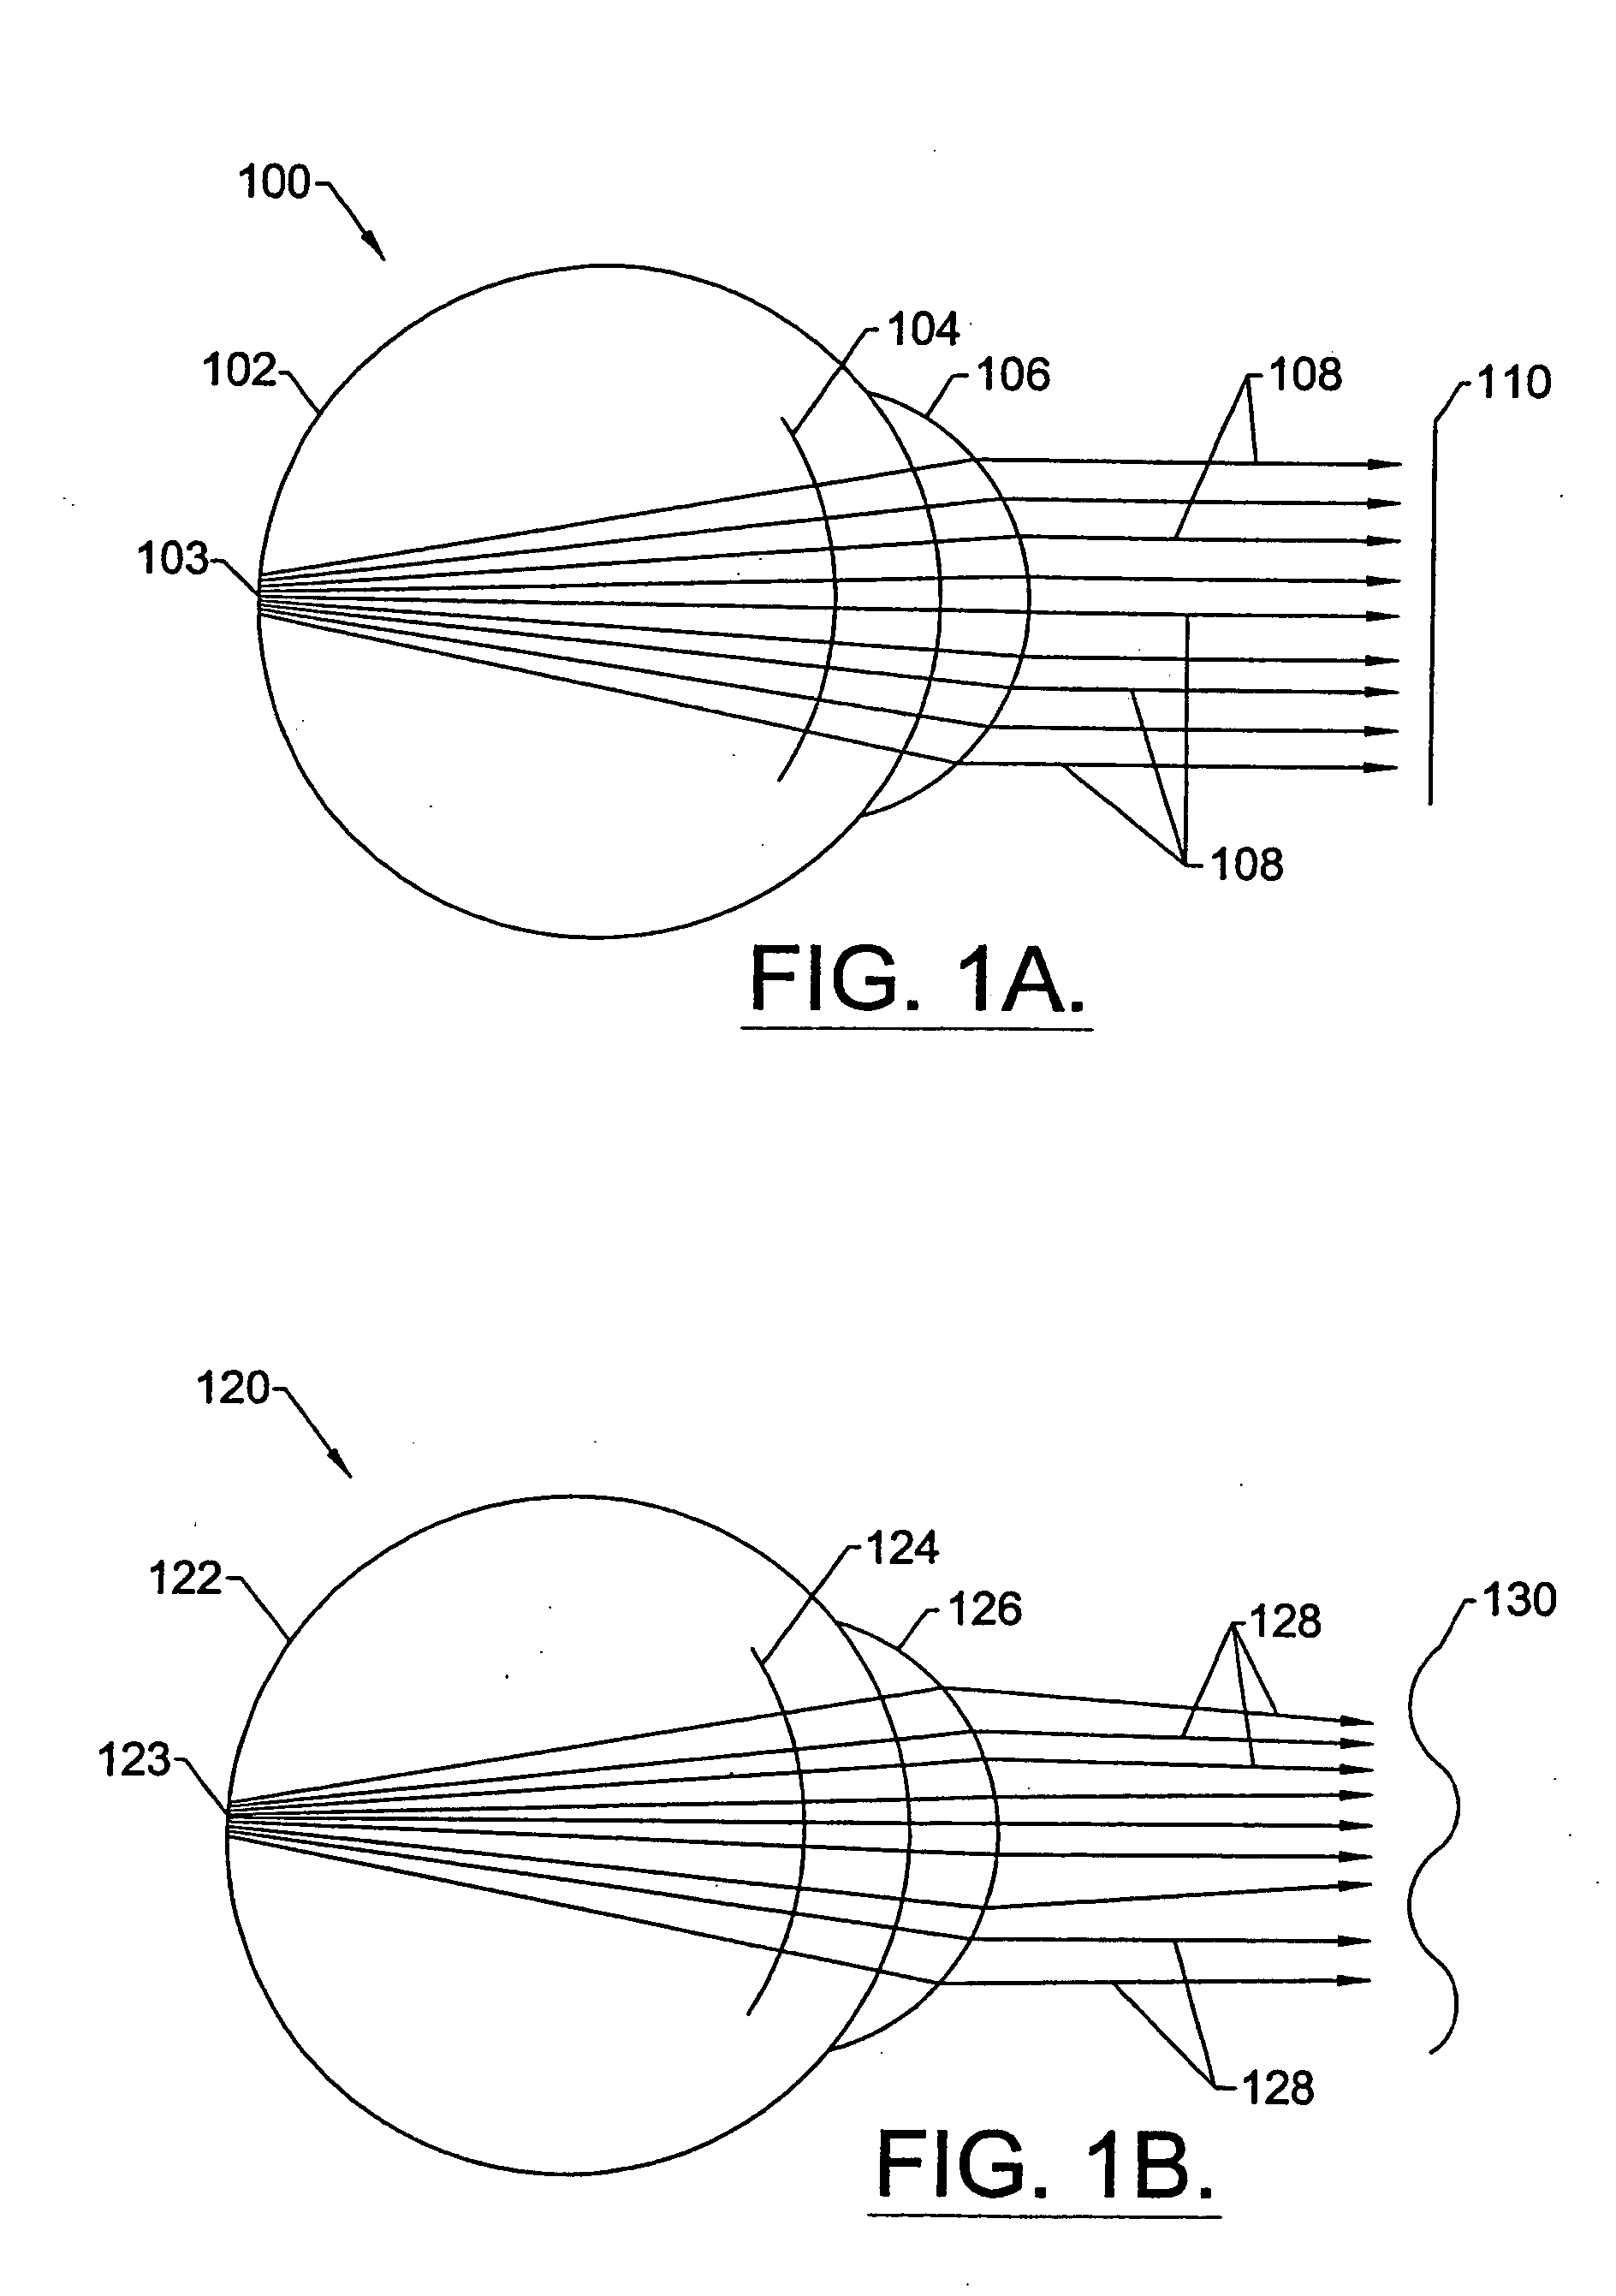 Method for determining and correcting vision